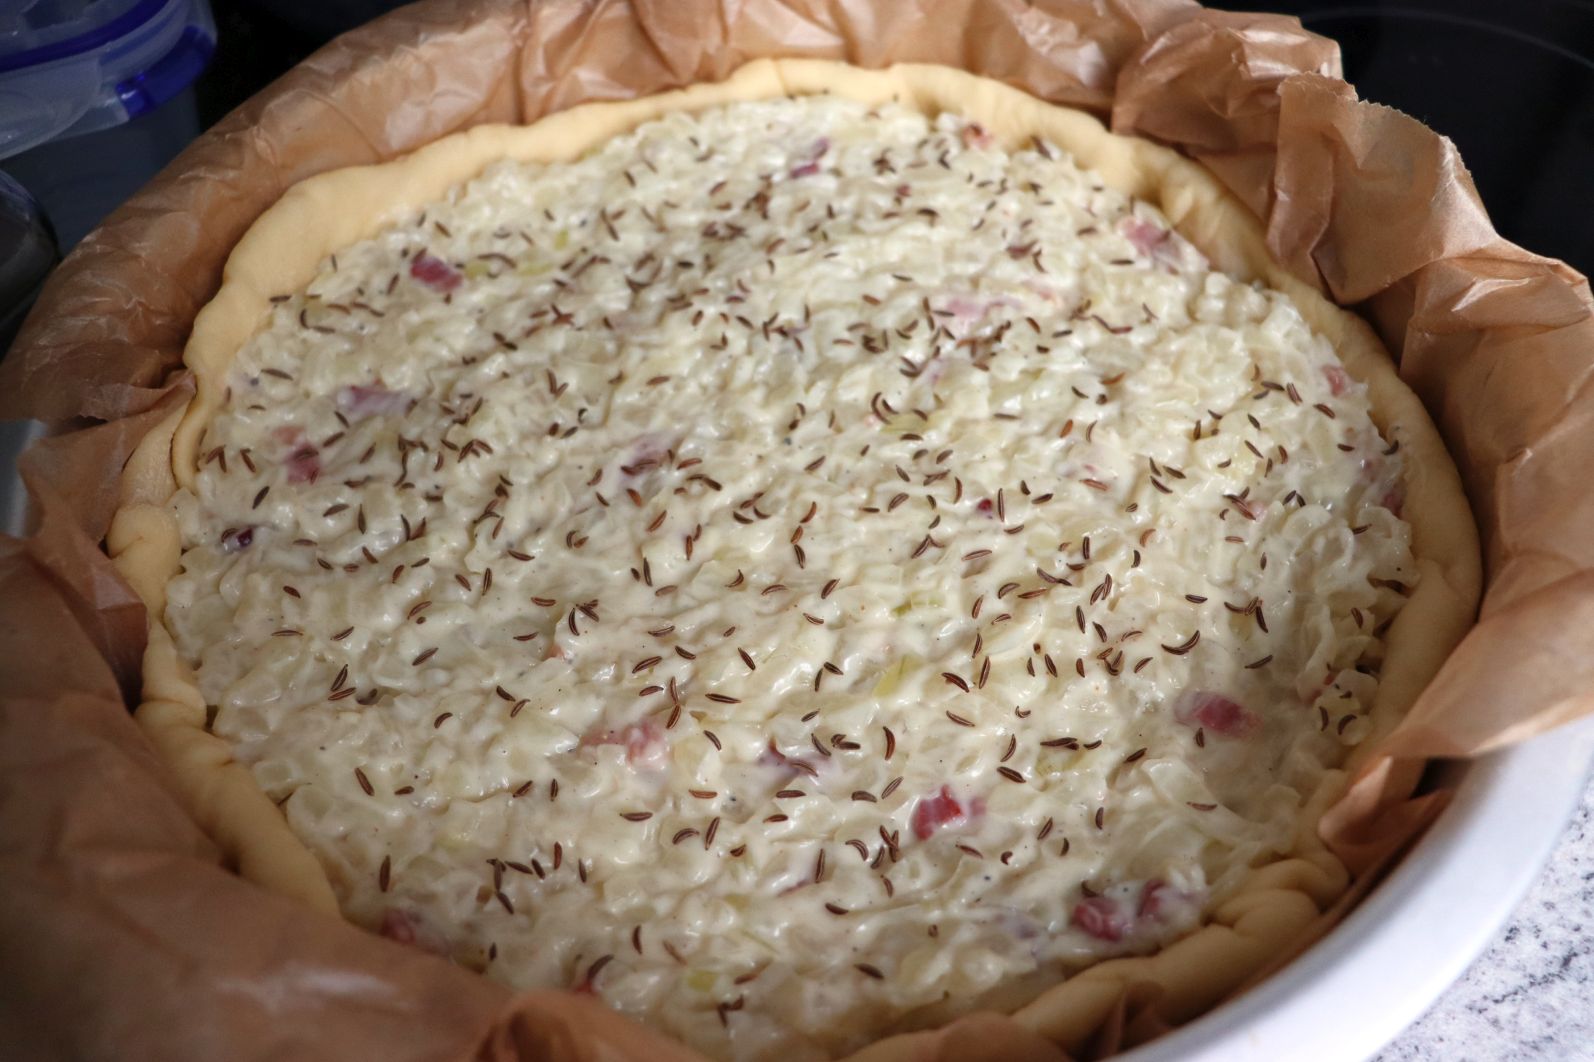 Raw Zwiebelkuchen - Onion Pie with onion and bacon filling and caraway seeds on top